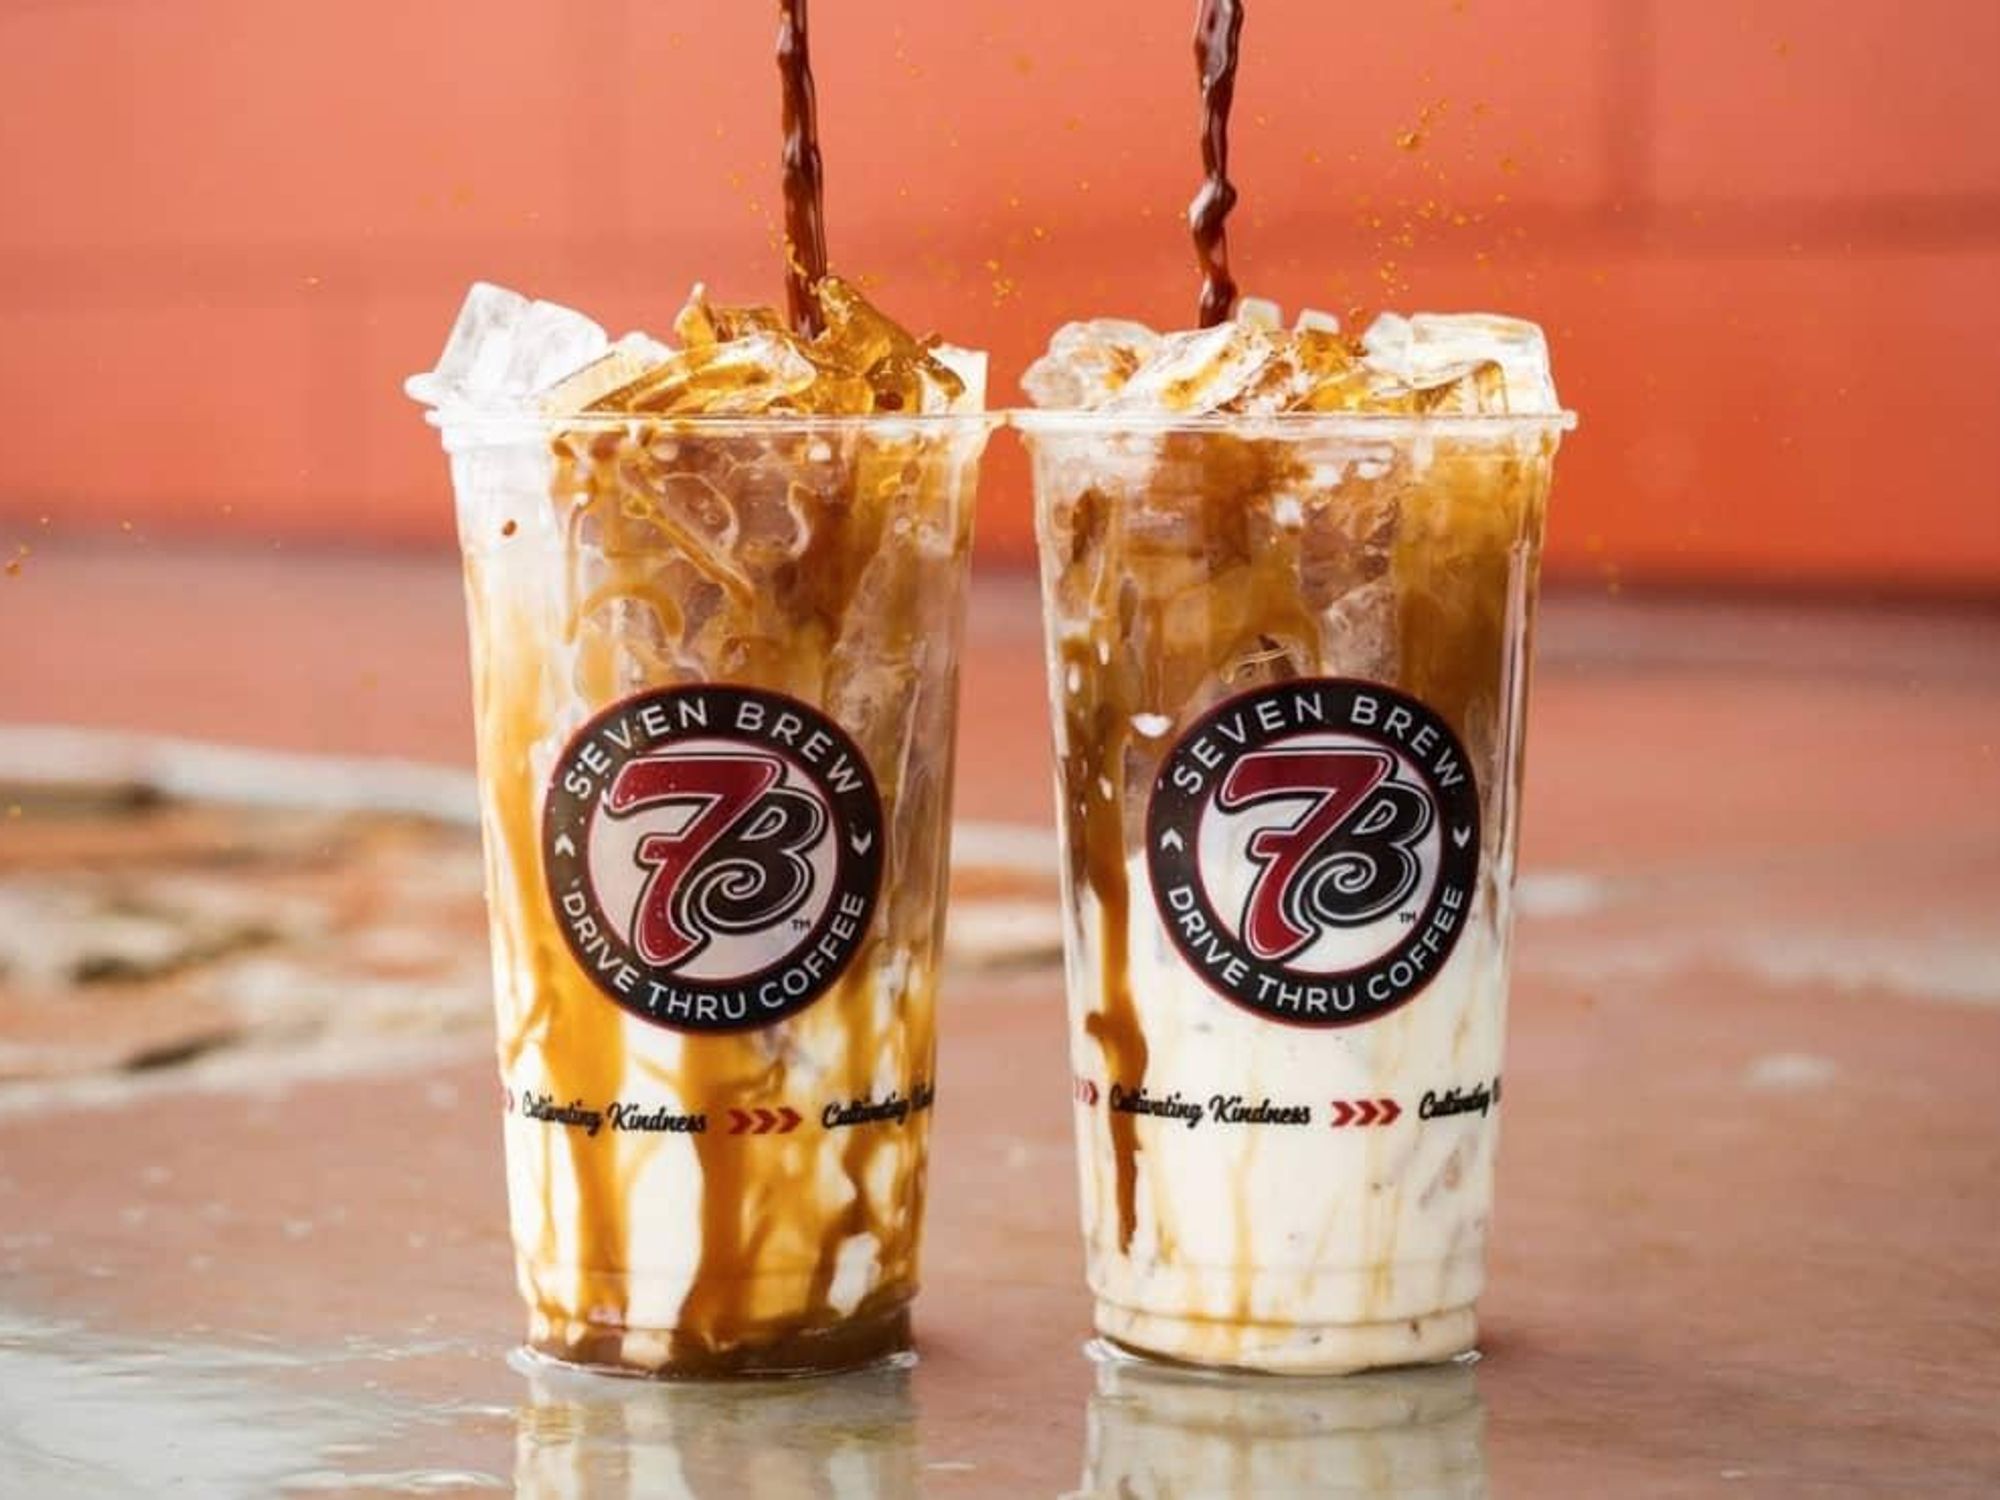 Red Mango debuts Frozen Coffee Chillers